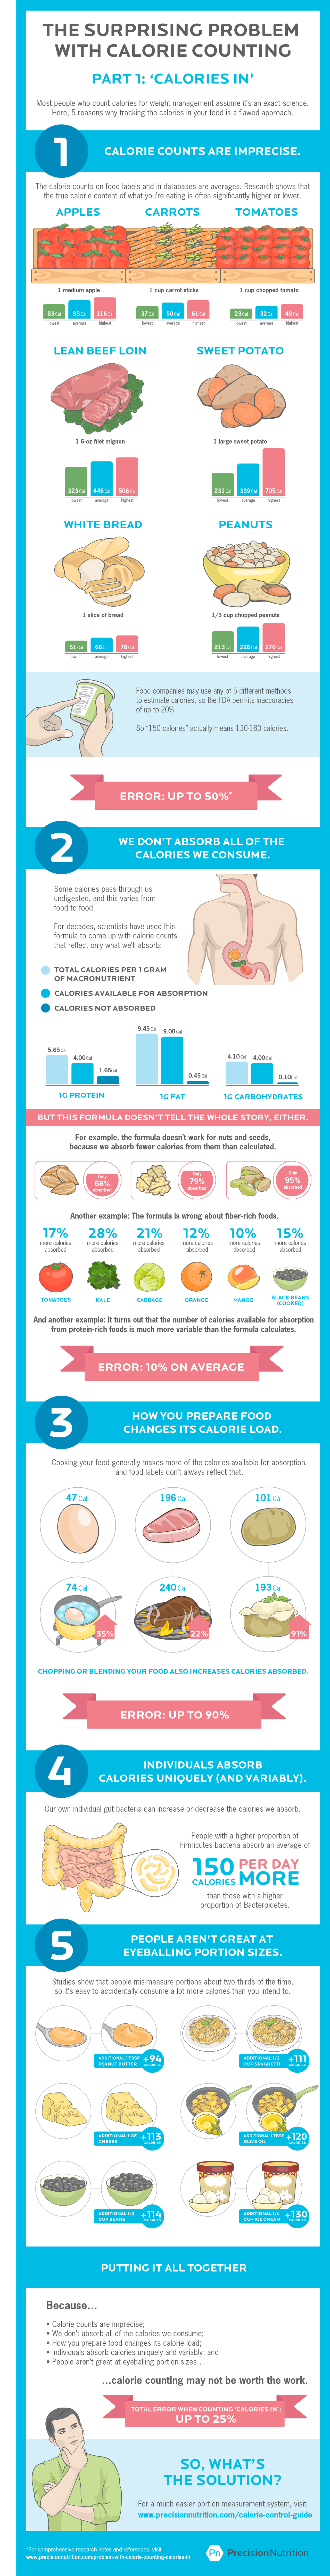 Why Calorie Counting Will Always Be Flawed [Infographic]